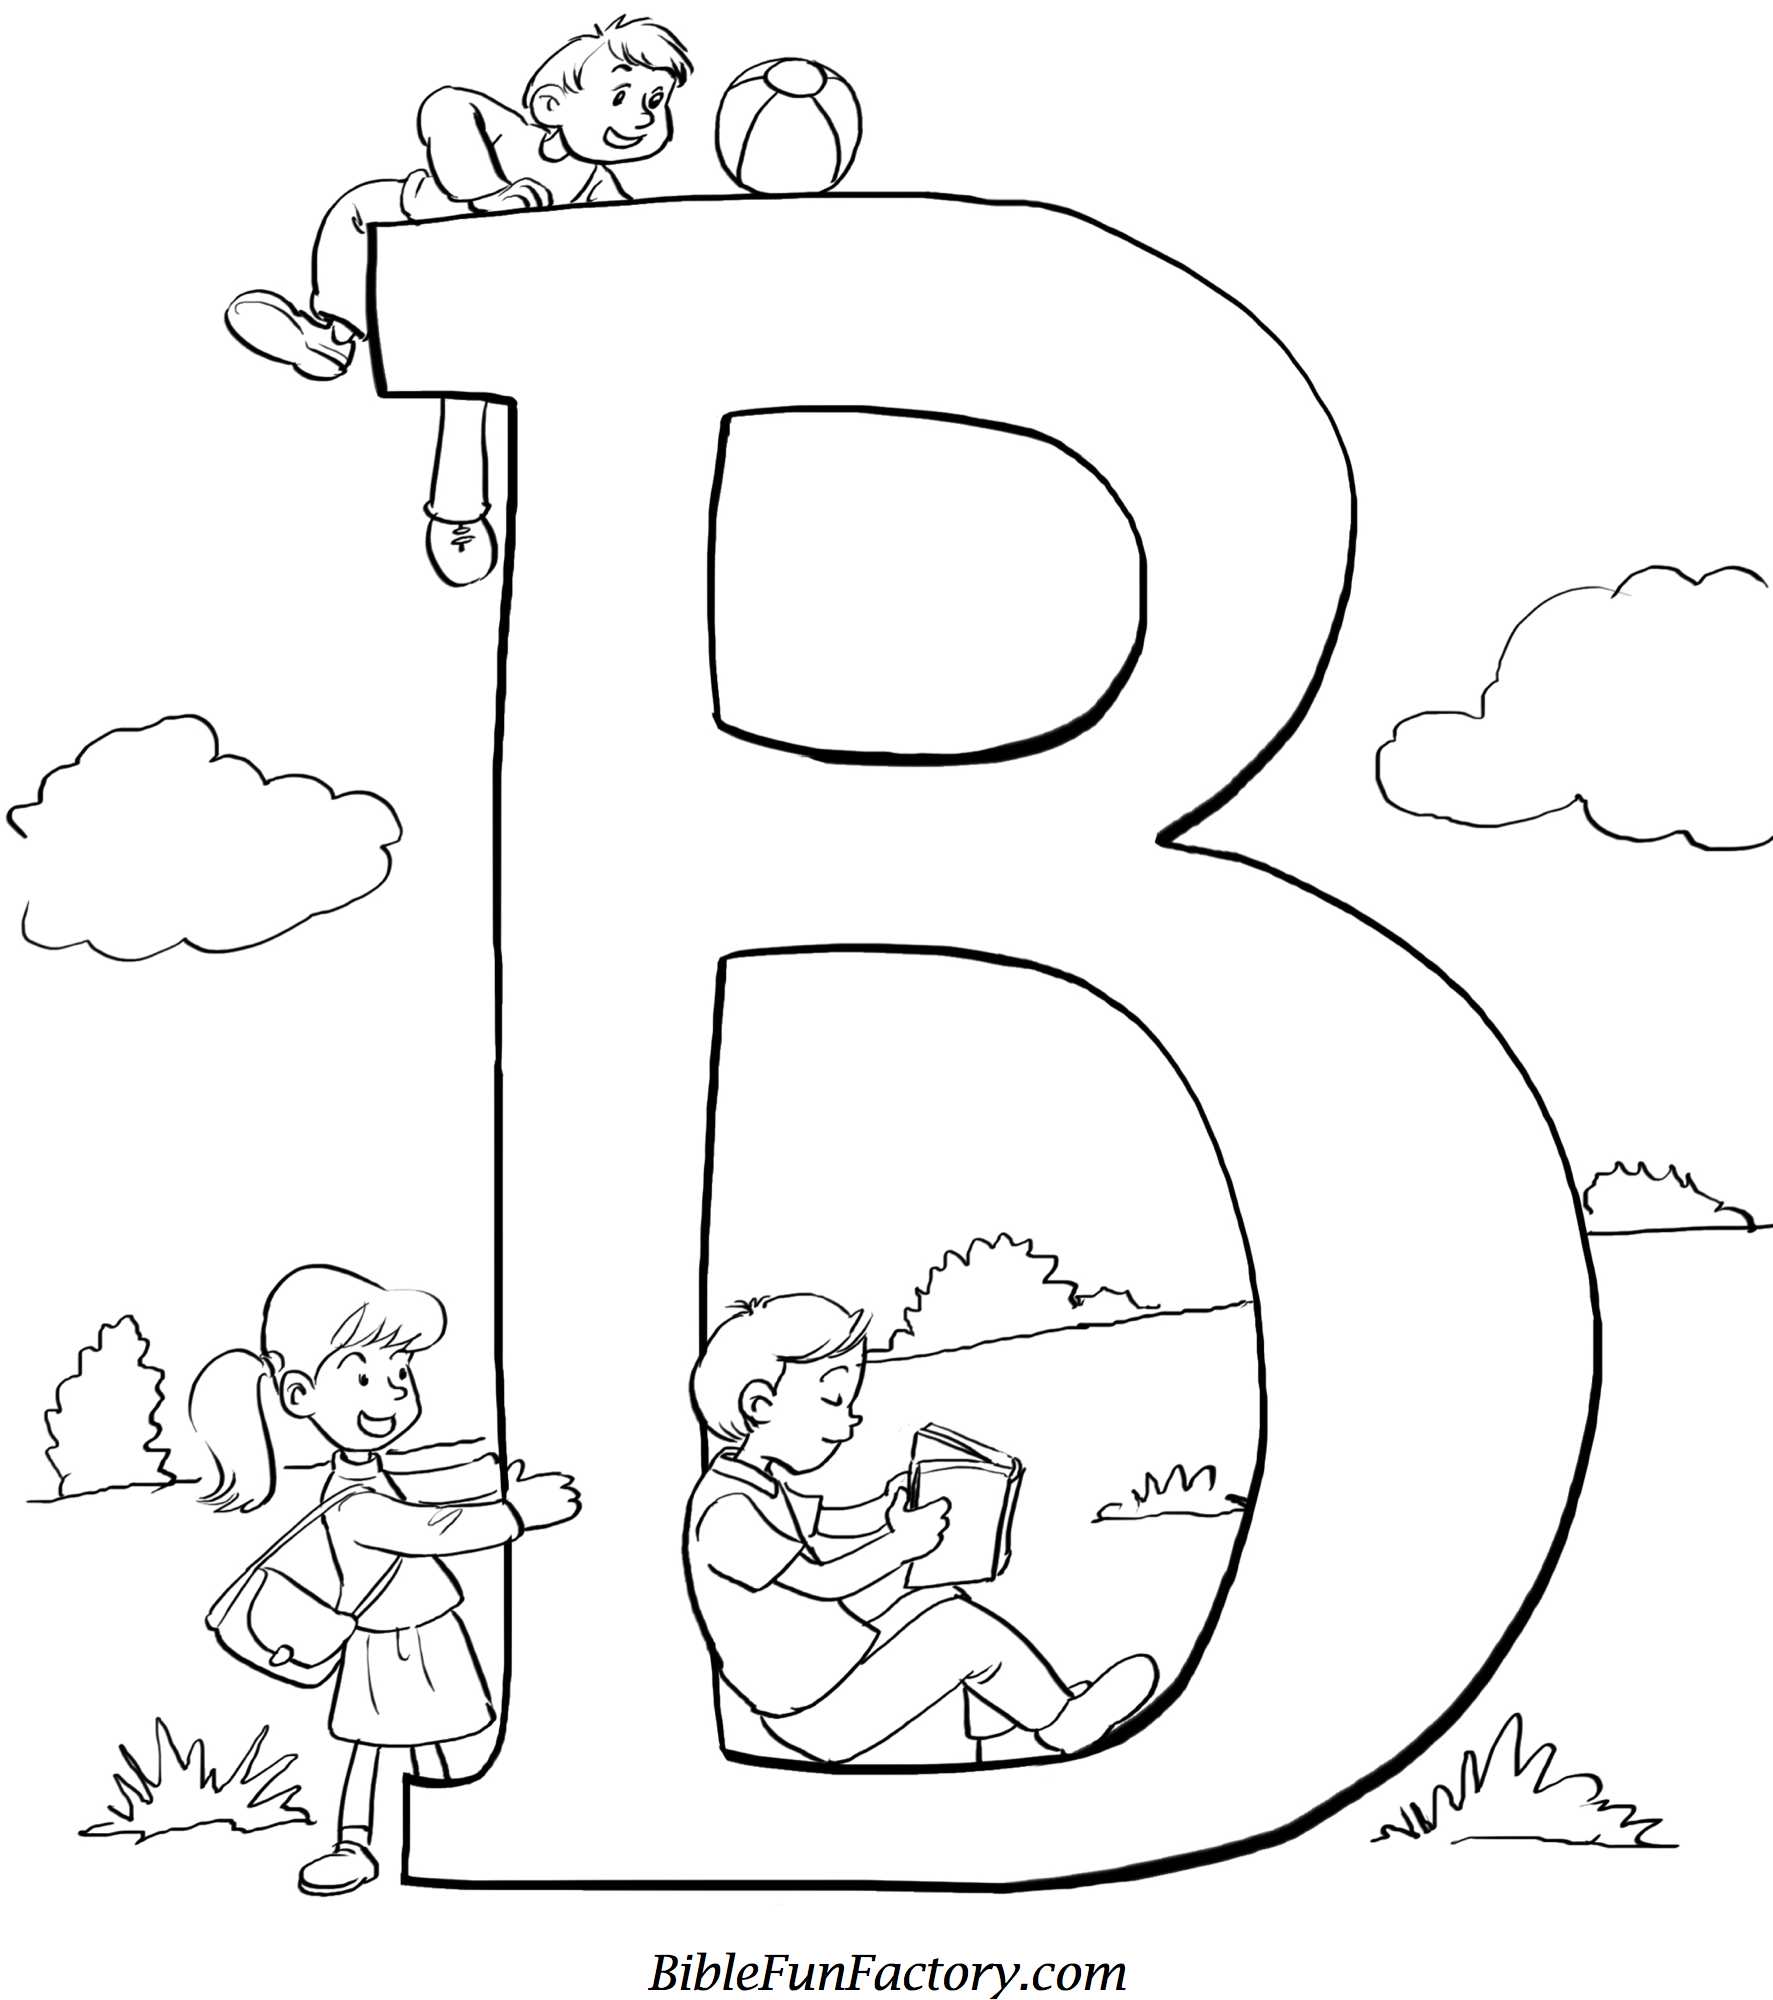 Bible Coloring Pages For Preschool Coloring Pages